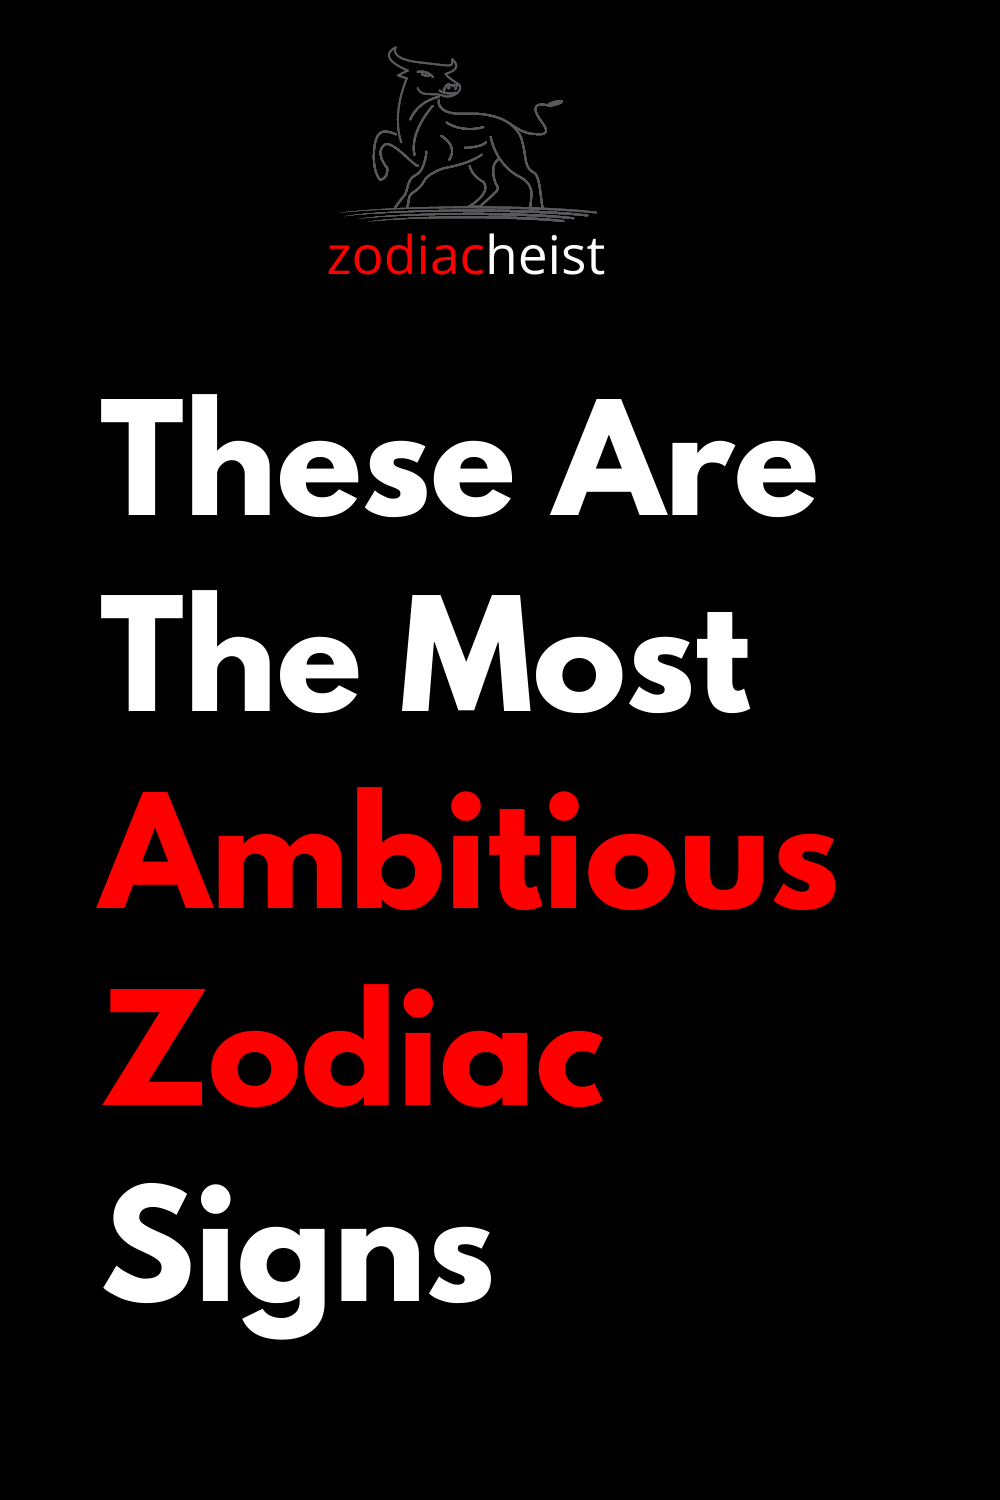 These Are The Most Ambitious Zodiac Signs